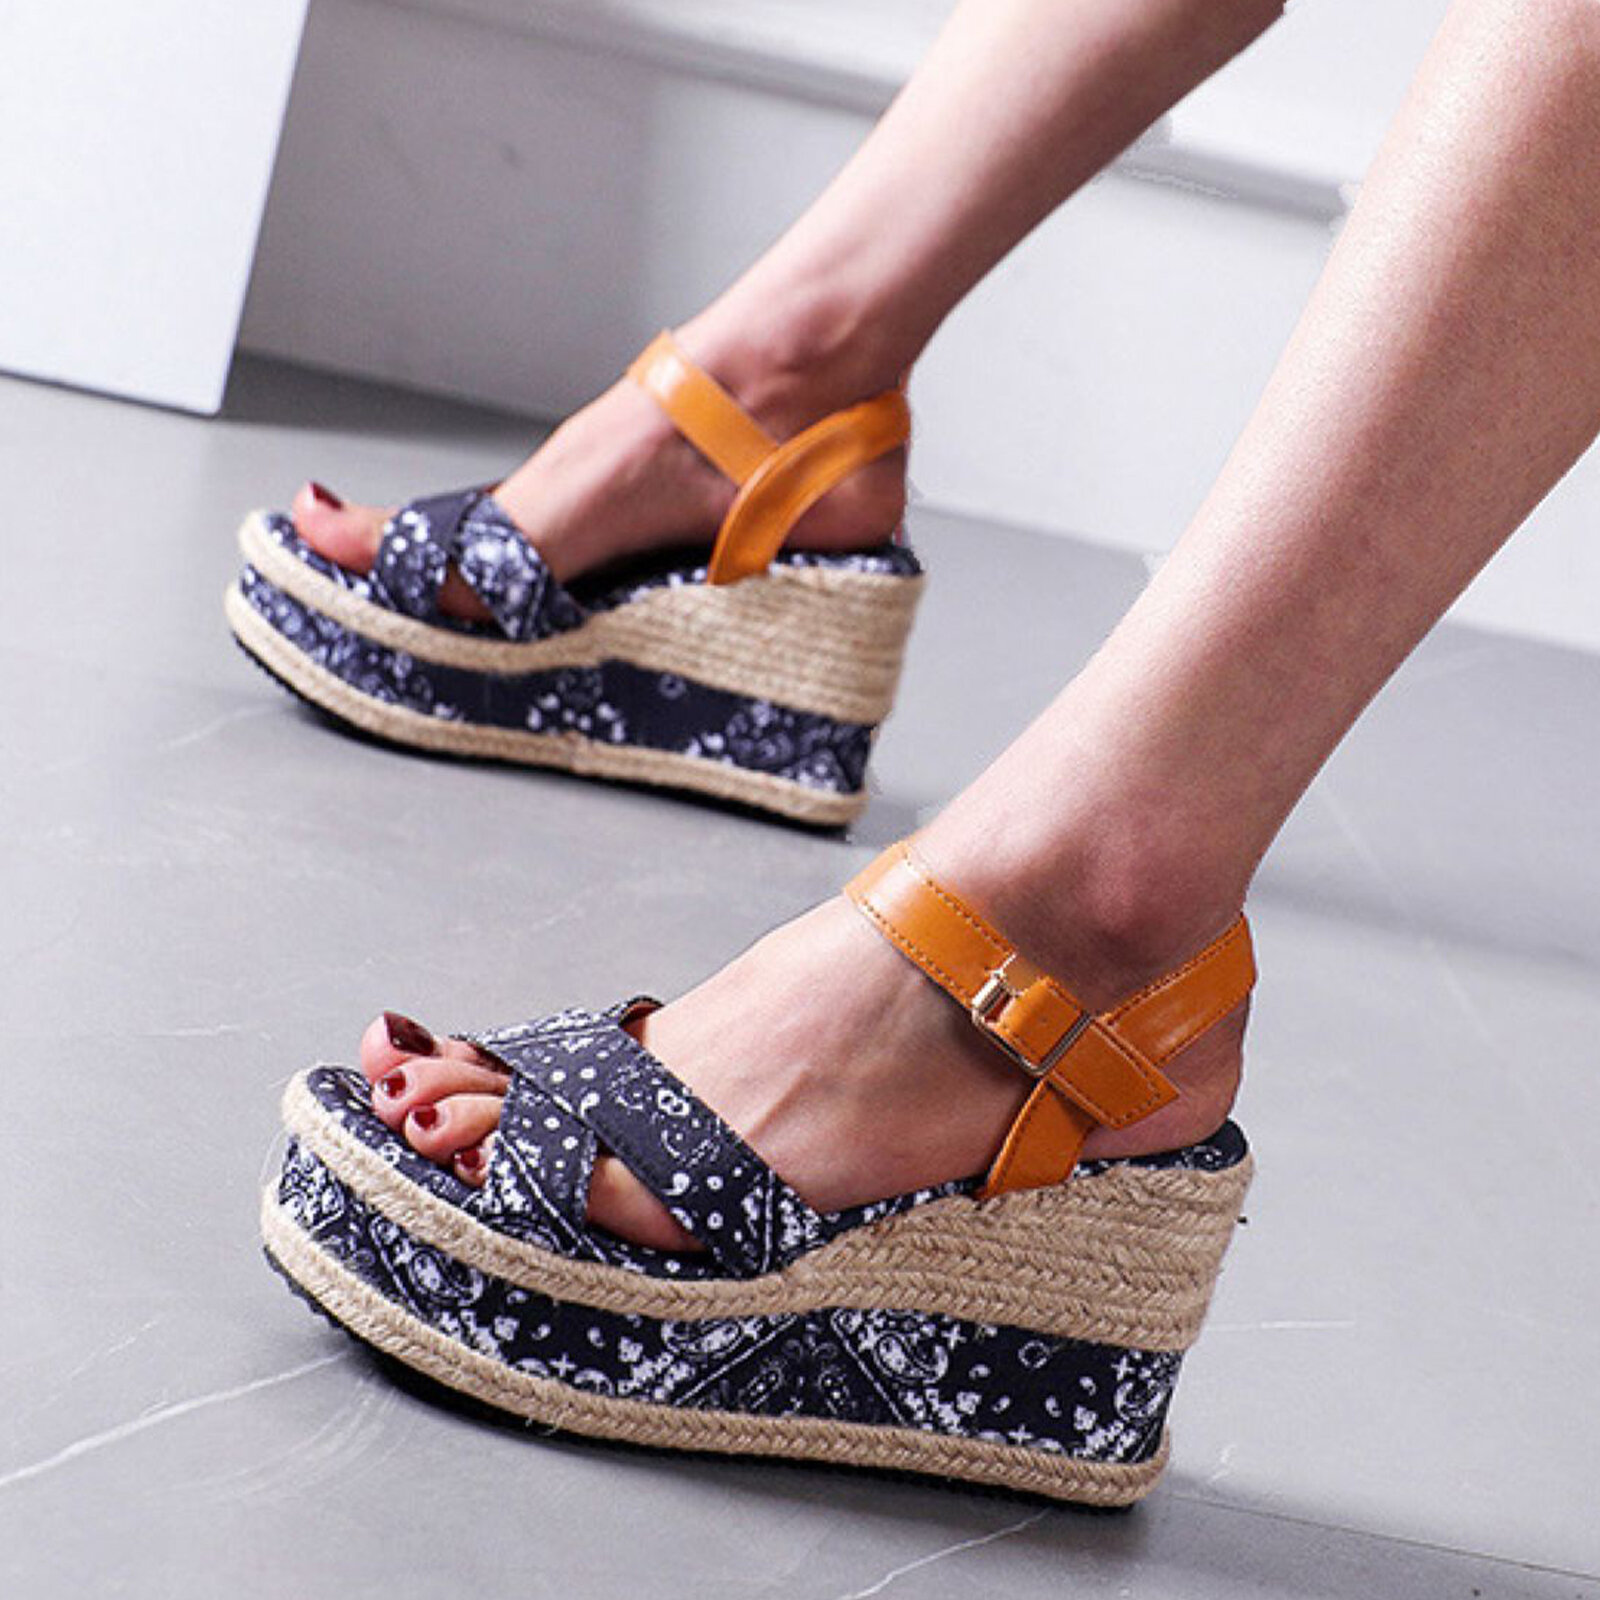 

Large Size Women Casual Summer Vacation Floral Print Espadrilles Wedges Sandals